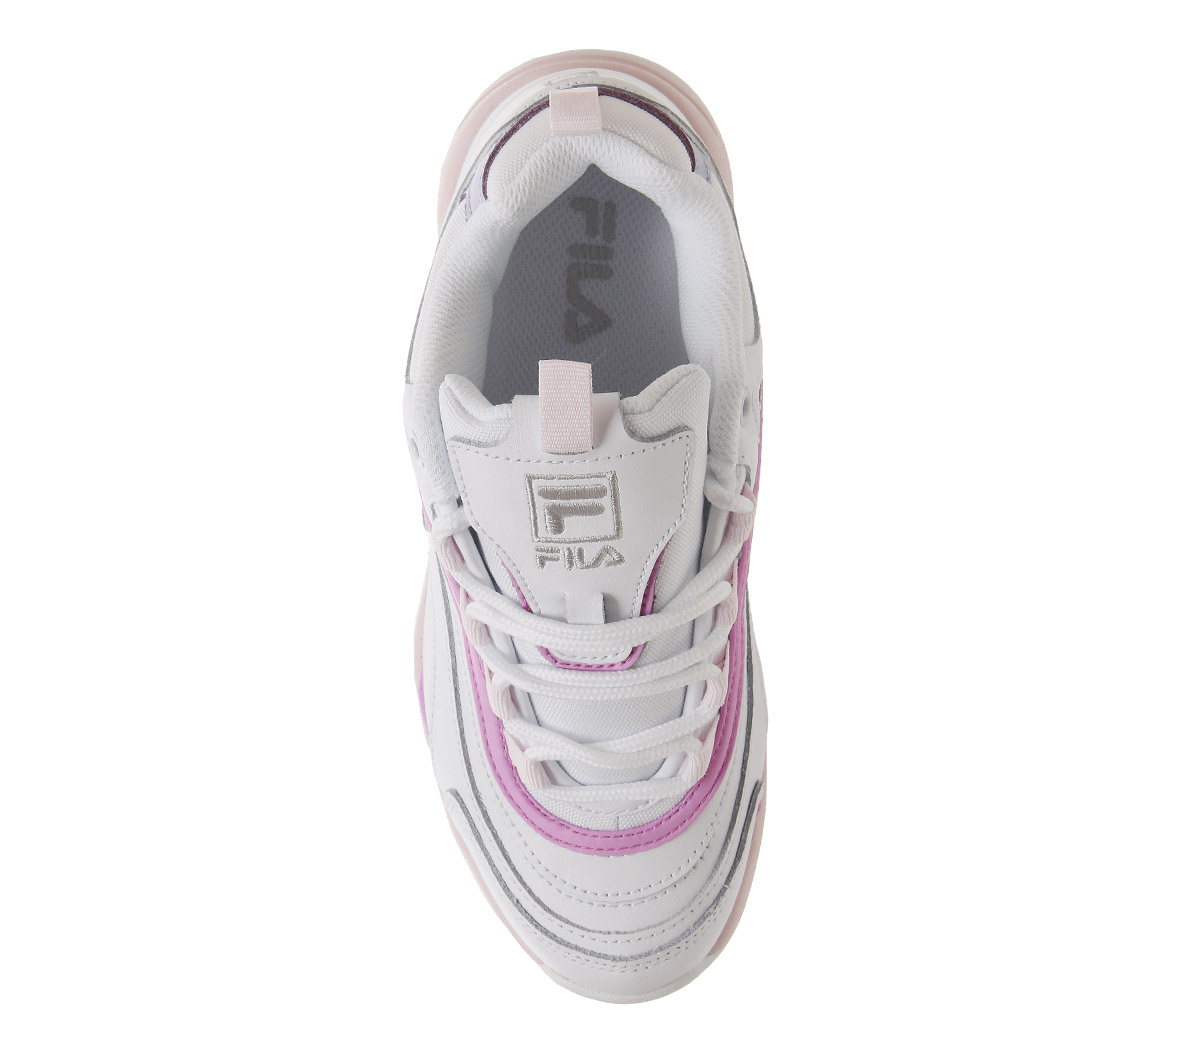 fila ray trainers White Heavenly Pink Purple Exclusive04fila ray trainers White Heavenly Pink Purple Exclusive04